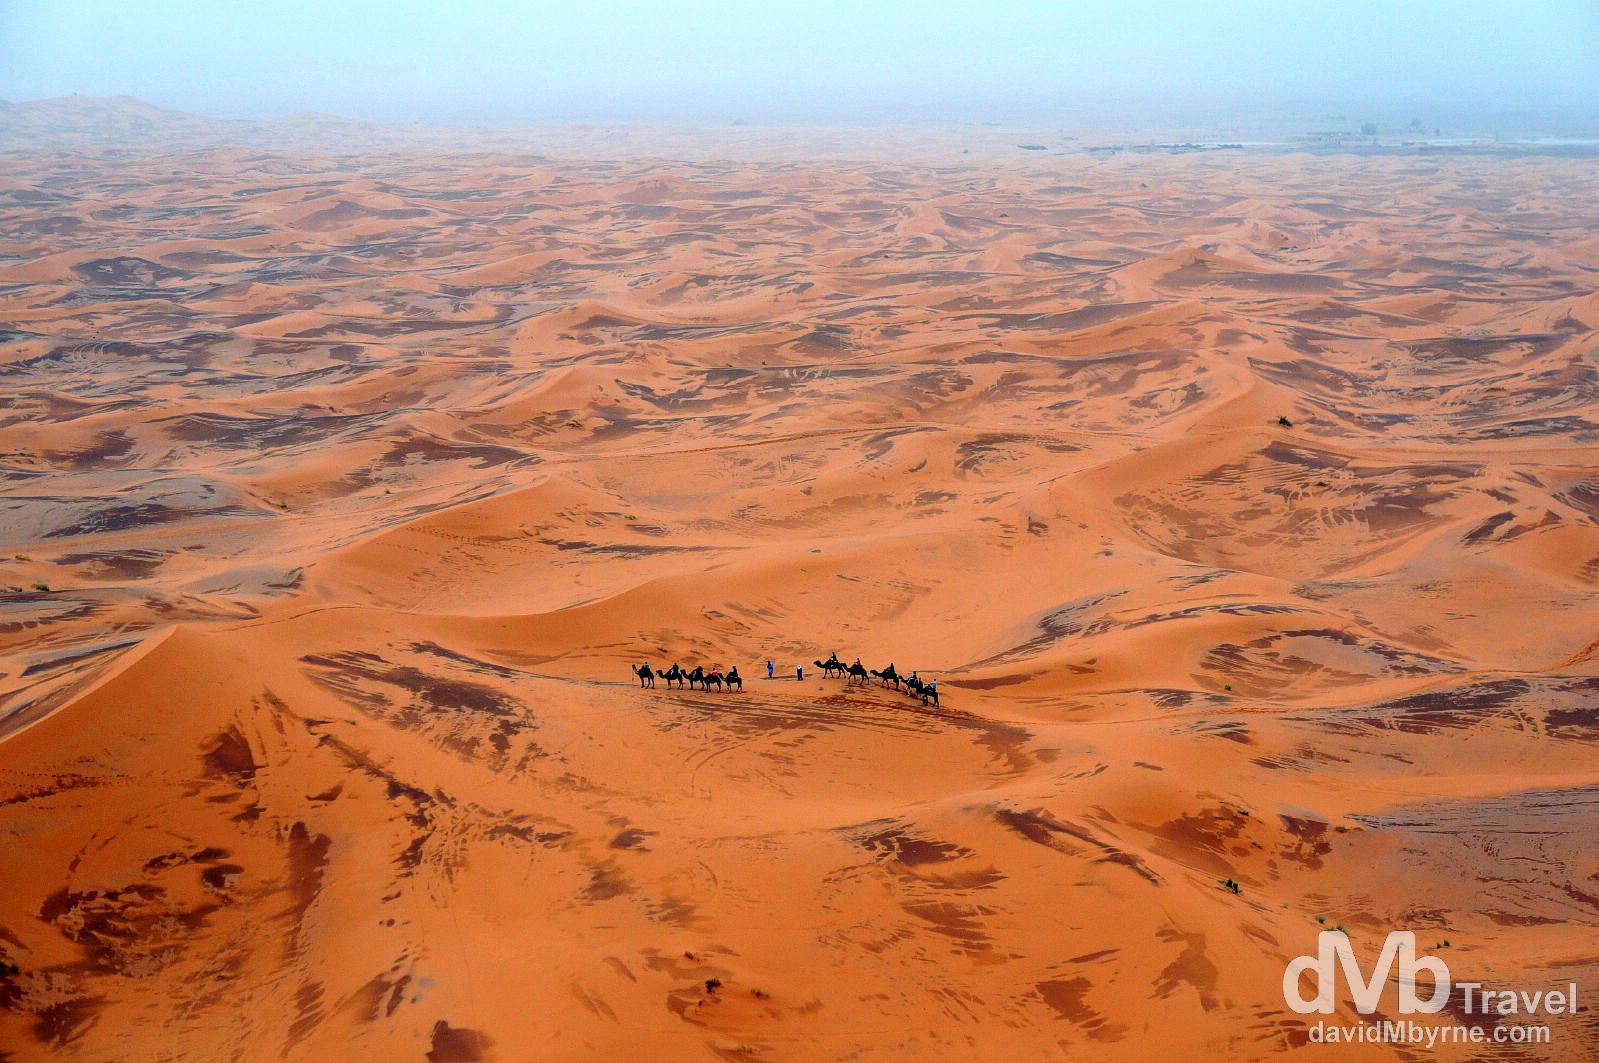 A sunset camel train as seen from on high in the desert of Erg Chebbi, Morocco. May 18th, 2014.